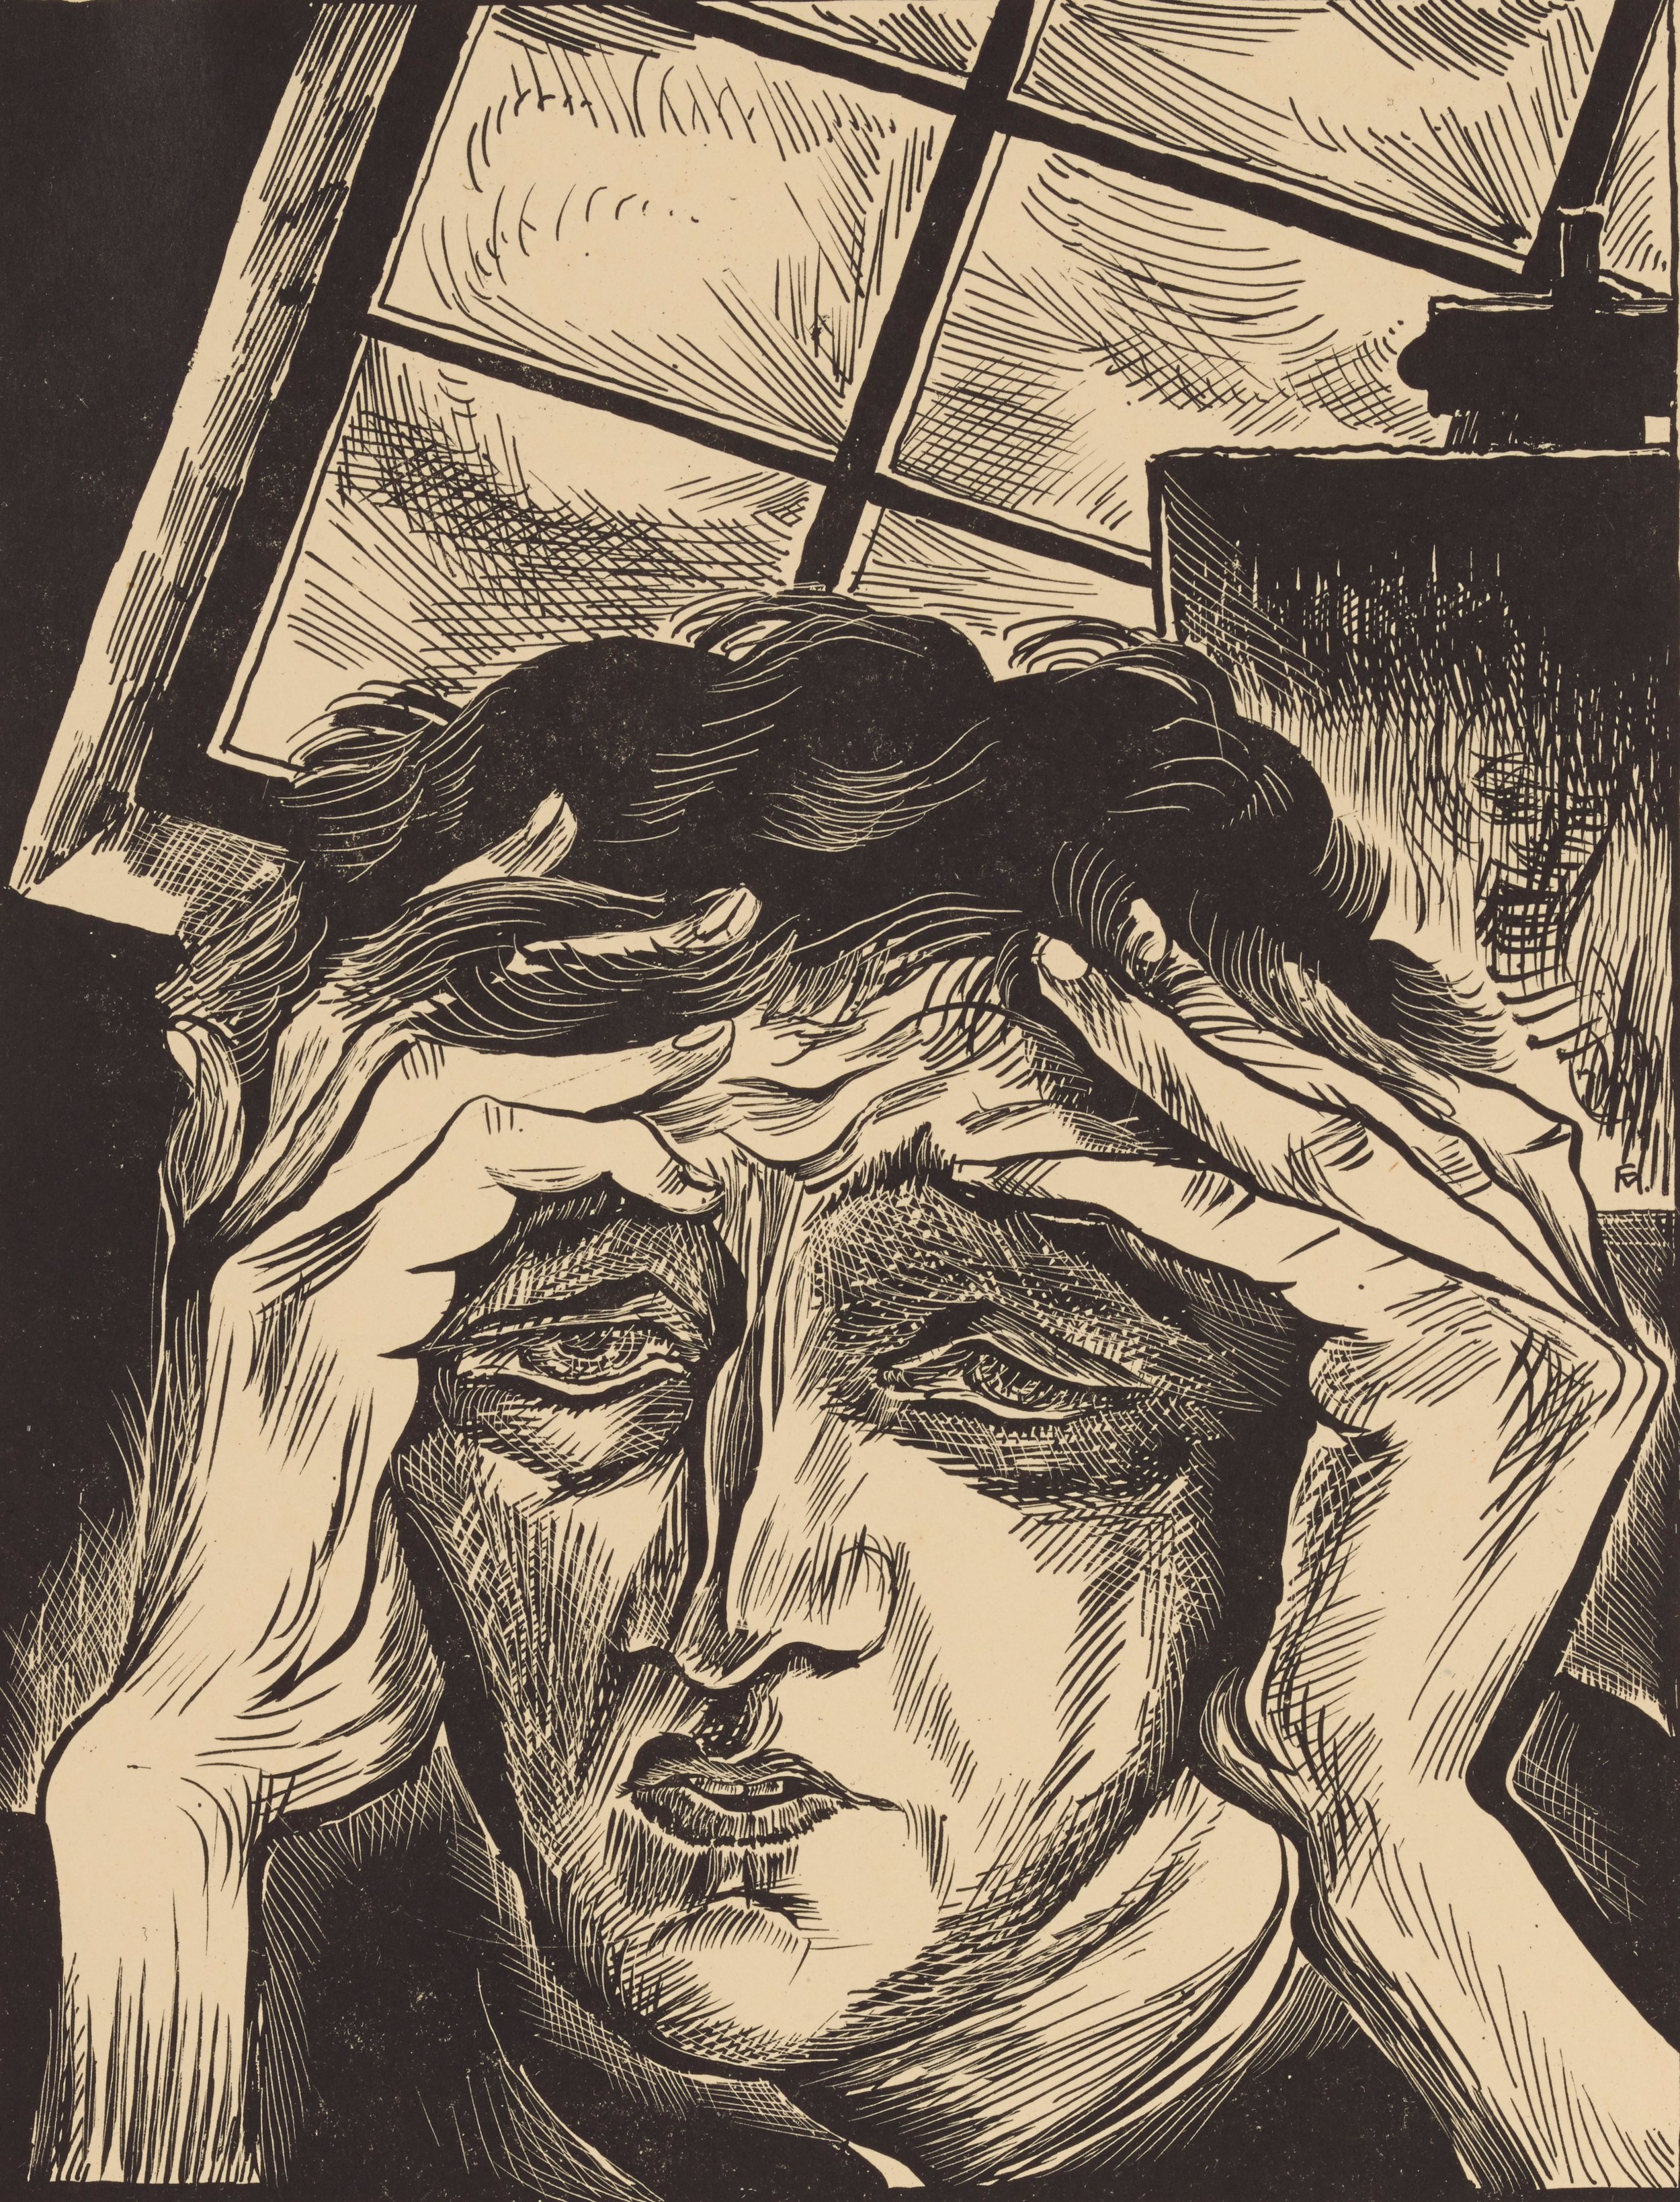  Conrad Felixmüller (Germany, 1897-1977),  Depression in Studio ,  (Bedrucktsein in Studio) , 1927, lithograph, 10 3/8 x 8 inches. Gift of David and Eva Bradford, 2006.30.5. Image courtesy of Luc Demers © 2022 Artists Rights Society (ARS), New York 